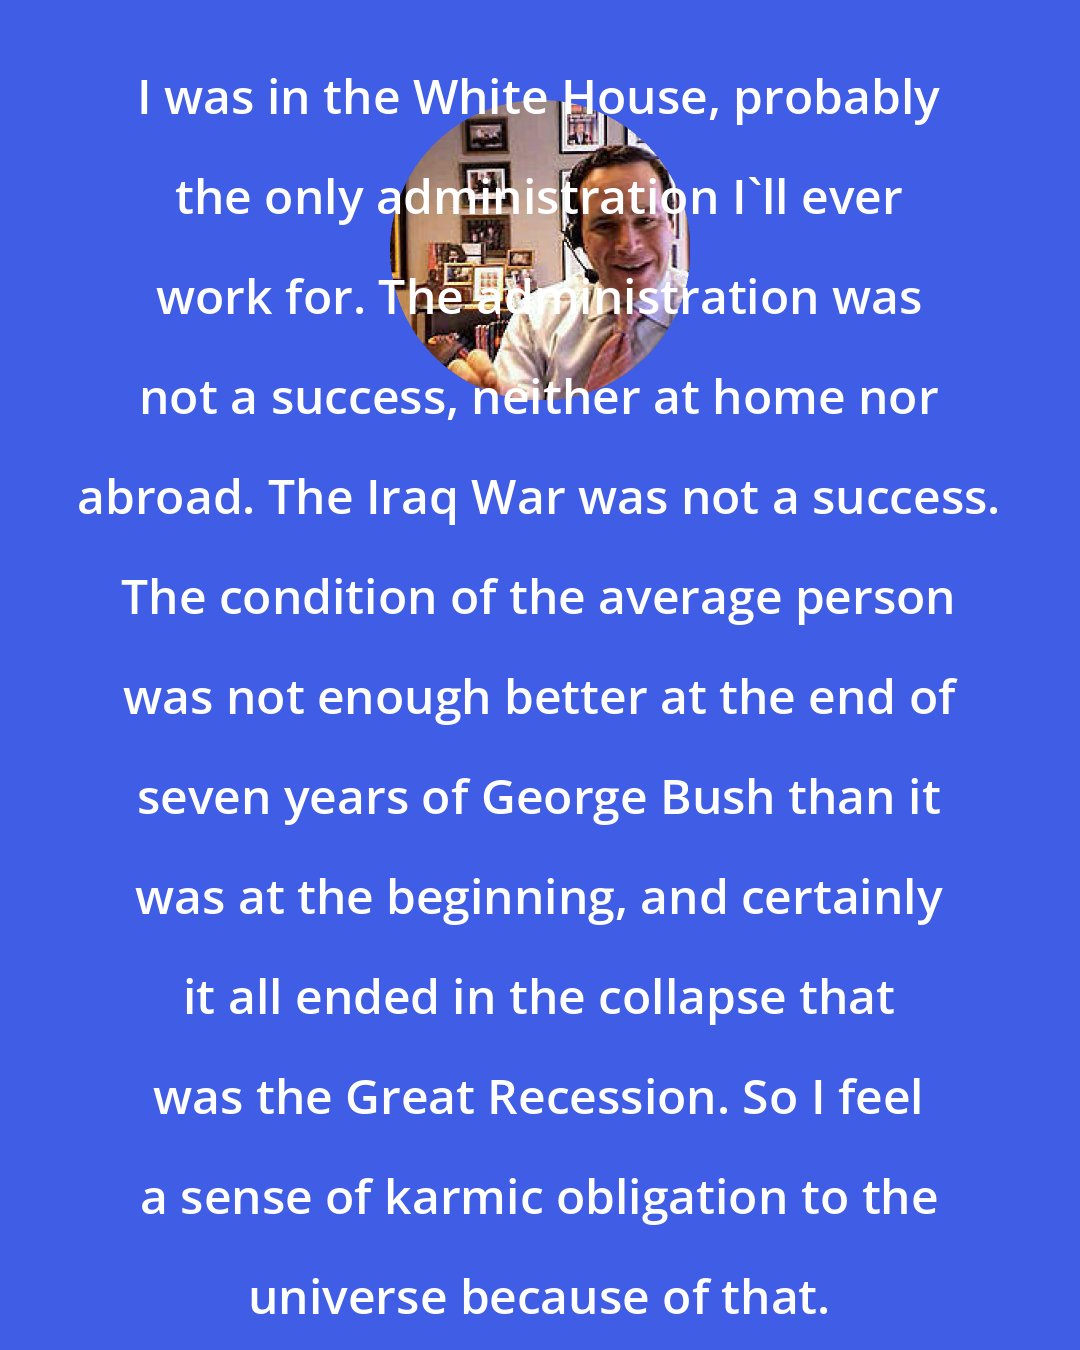 David Frum: I was in the White House, probably the only administration I'll ever work for. The administration was not a success, neither at home nor abroad. The Iraq War was not a success. The condition of the average person was not enough better at the end of seven years of George Bush than it was at the beginning, and certainly it all ended in the collapse that was the Great Recession. So I feel a sense of karmic obligation to the universe because of that.